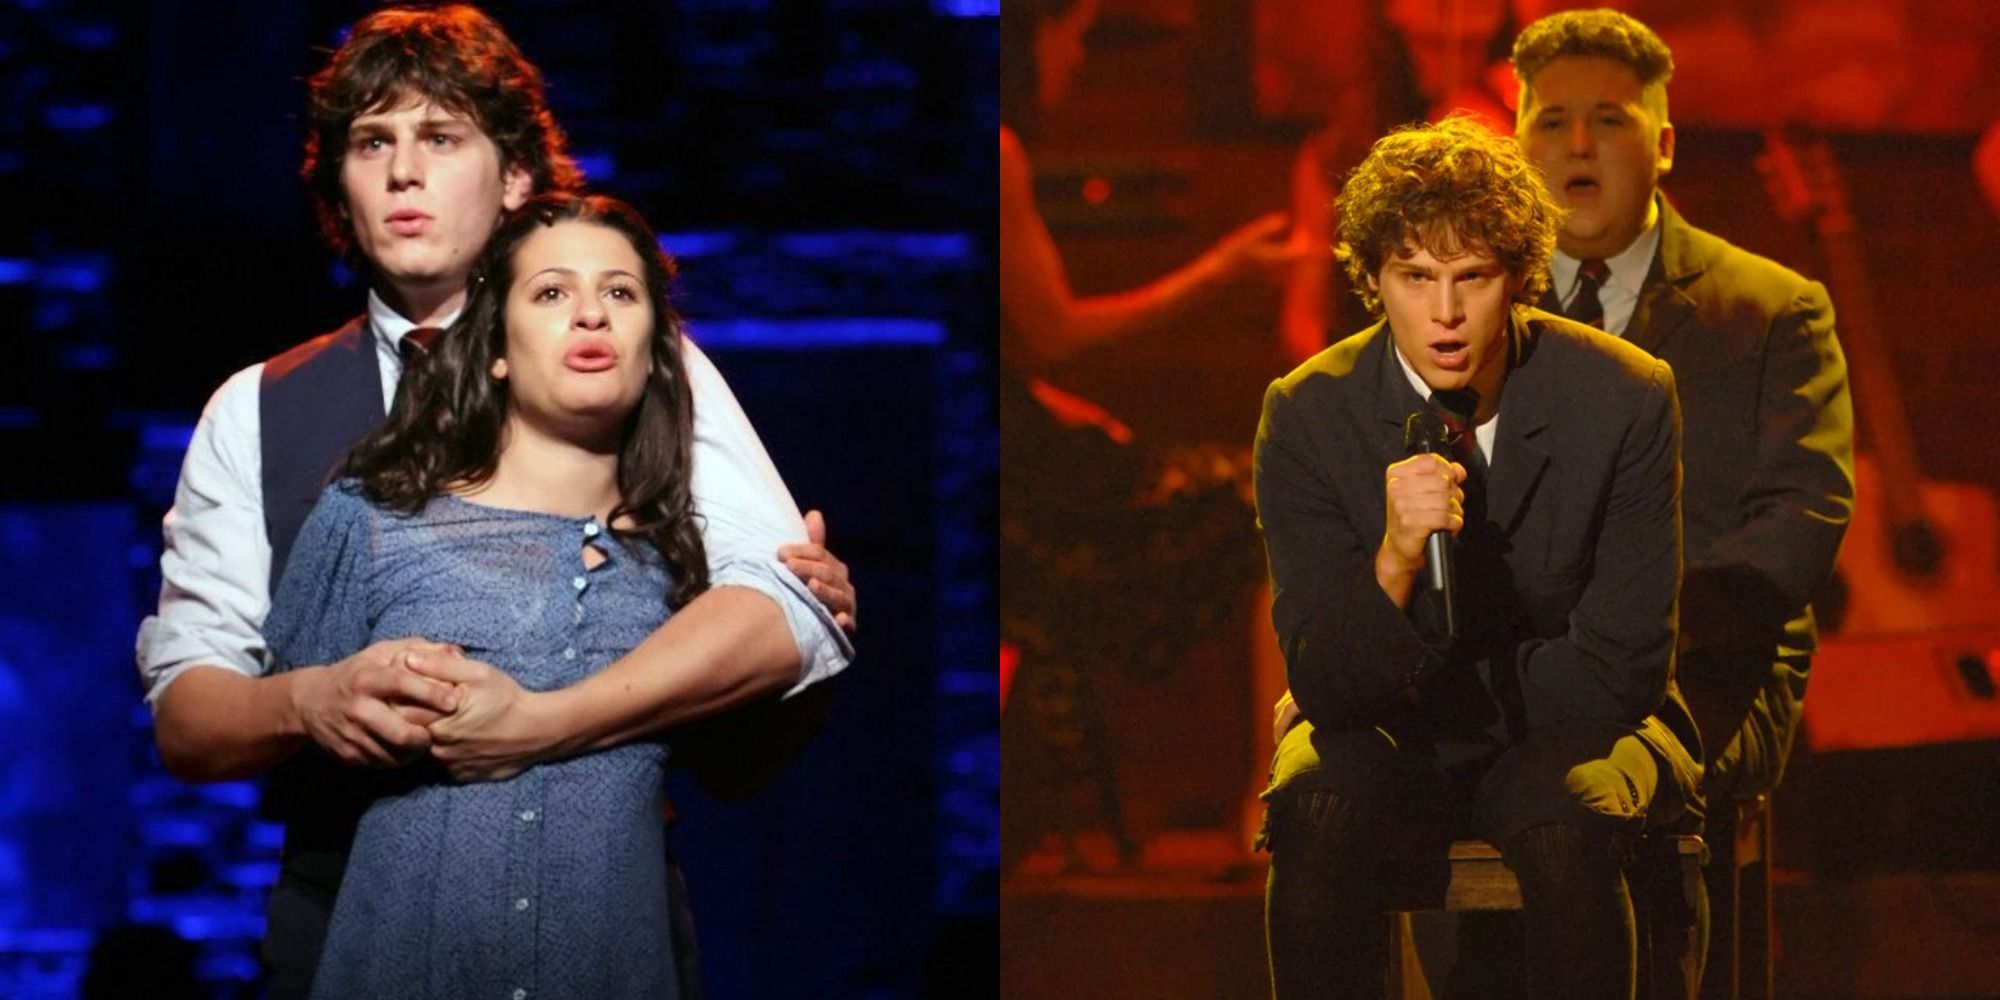 Split image showing Melchior and Wendla and Melchior with the boys in Spring Awakening.